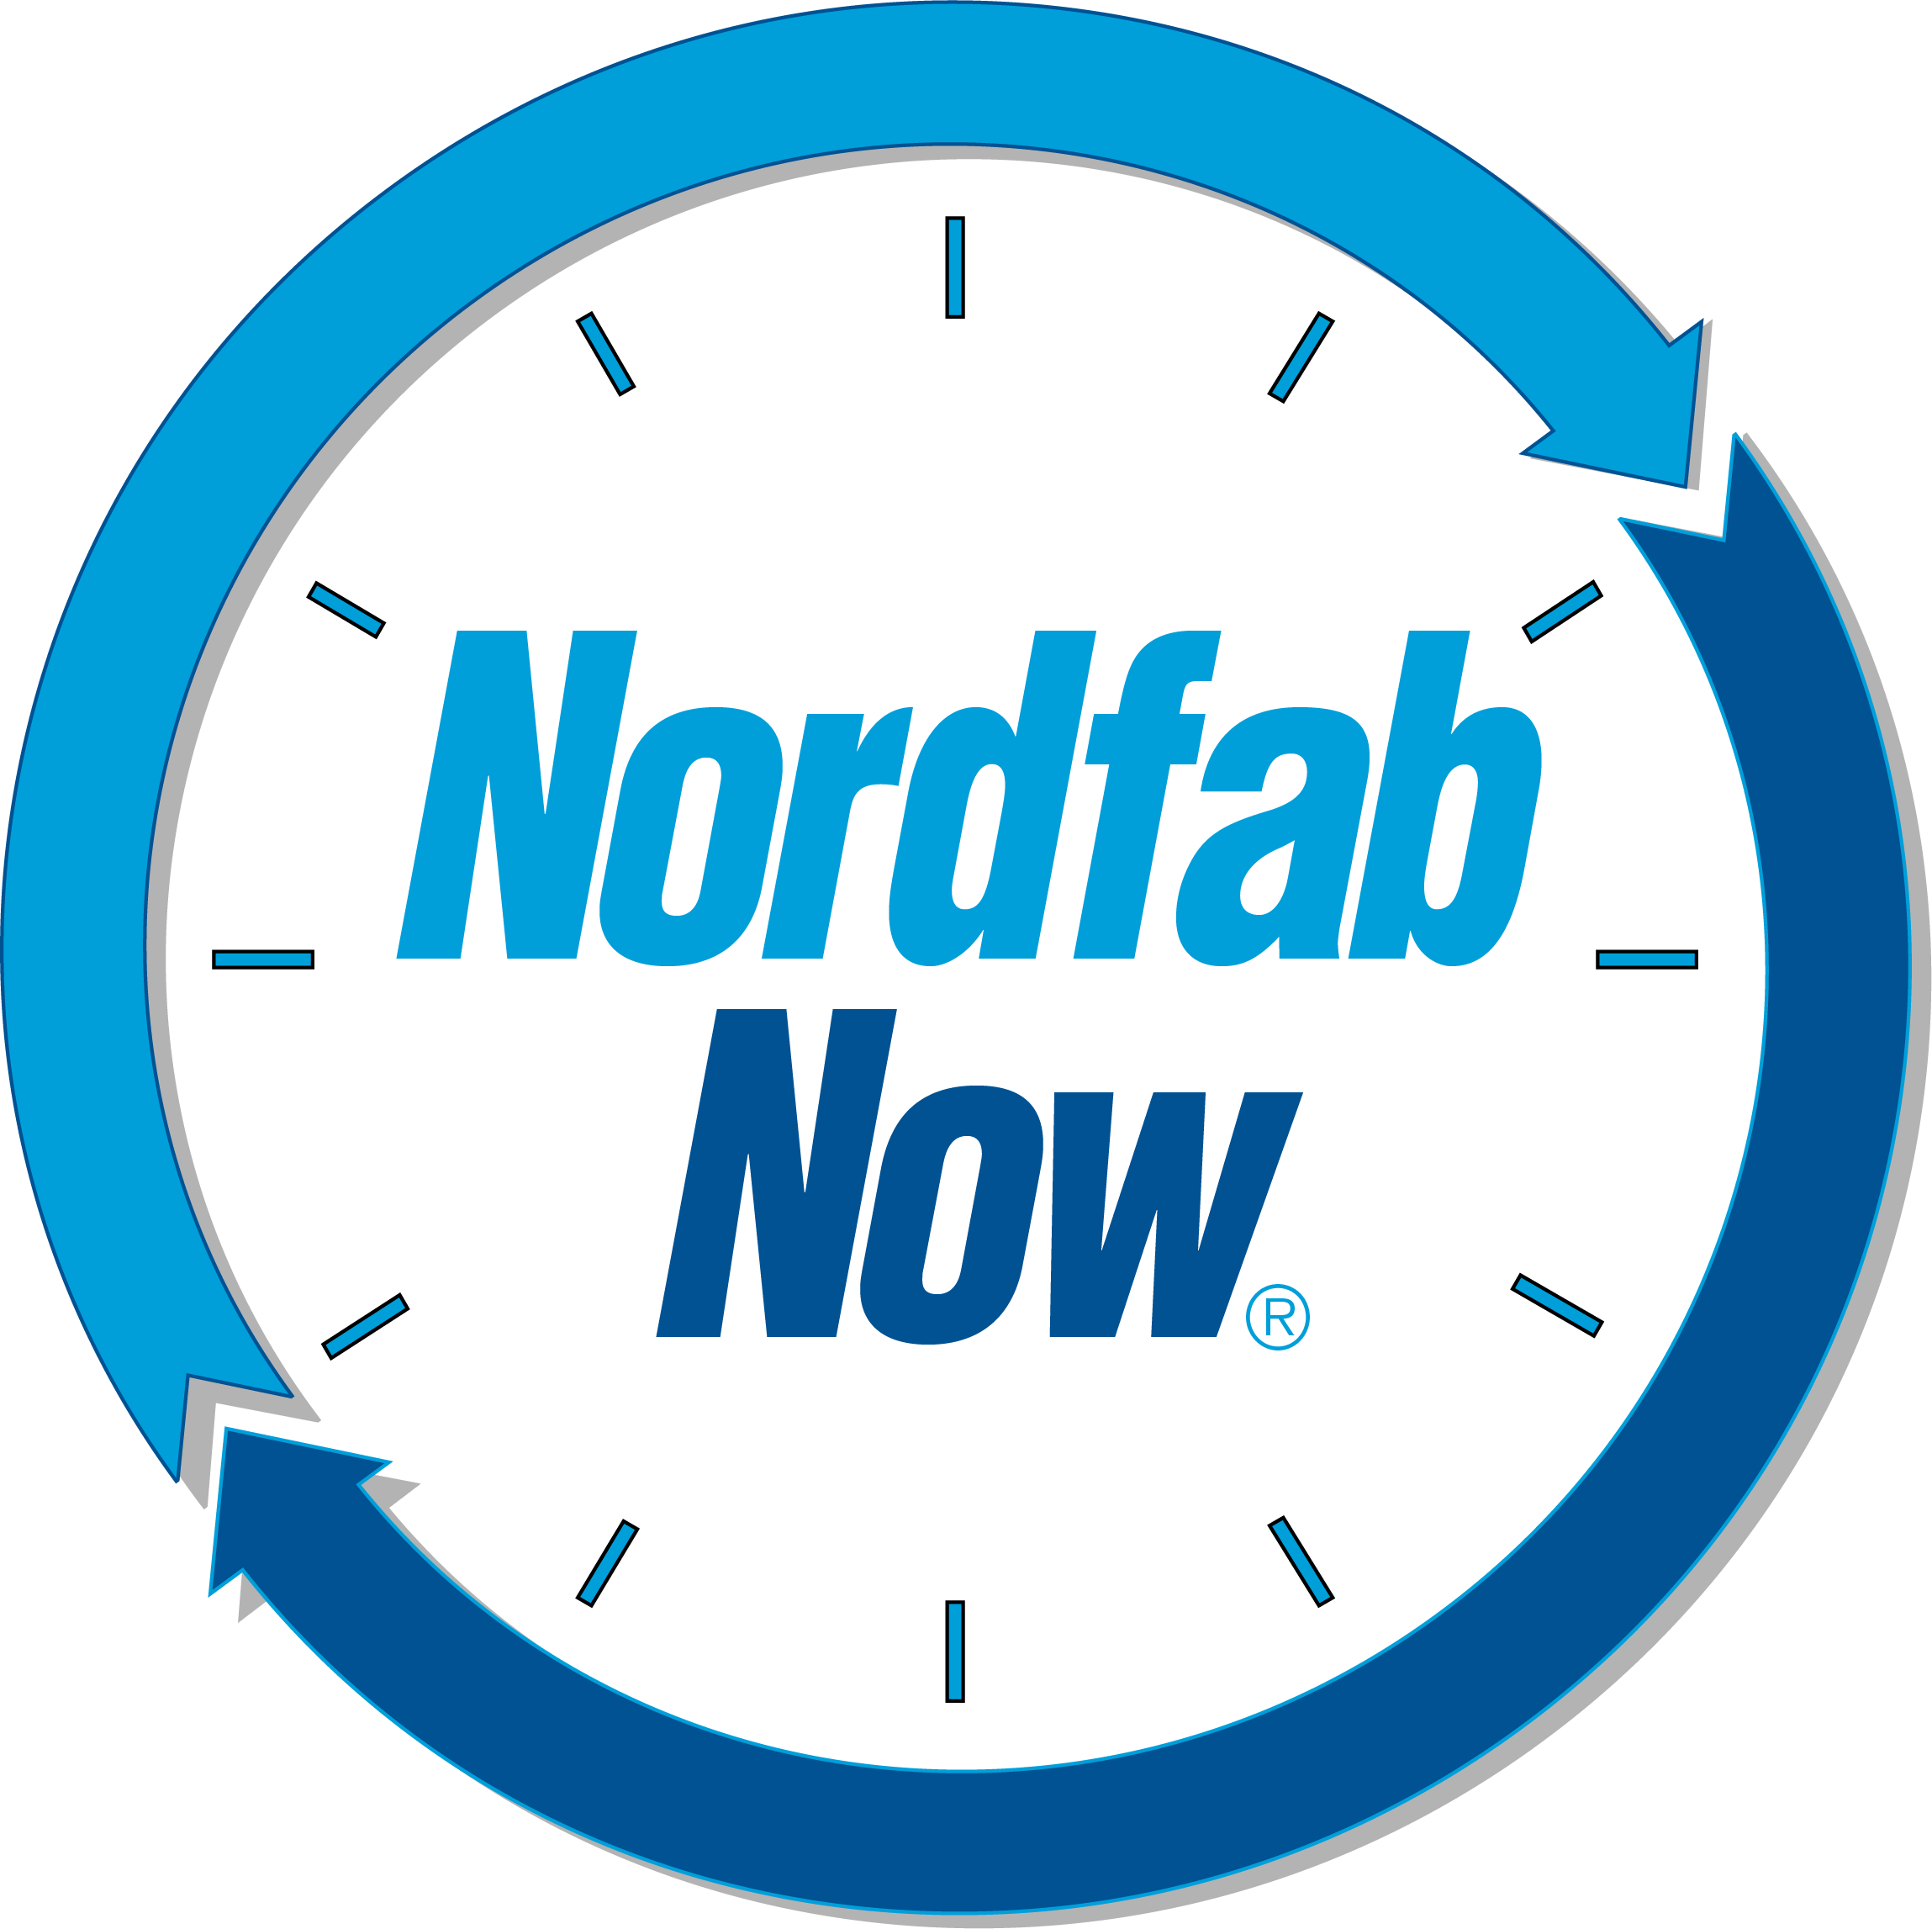 Nordfab Now